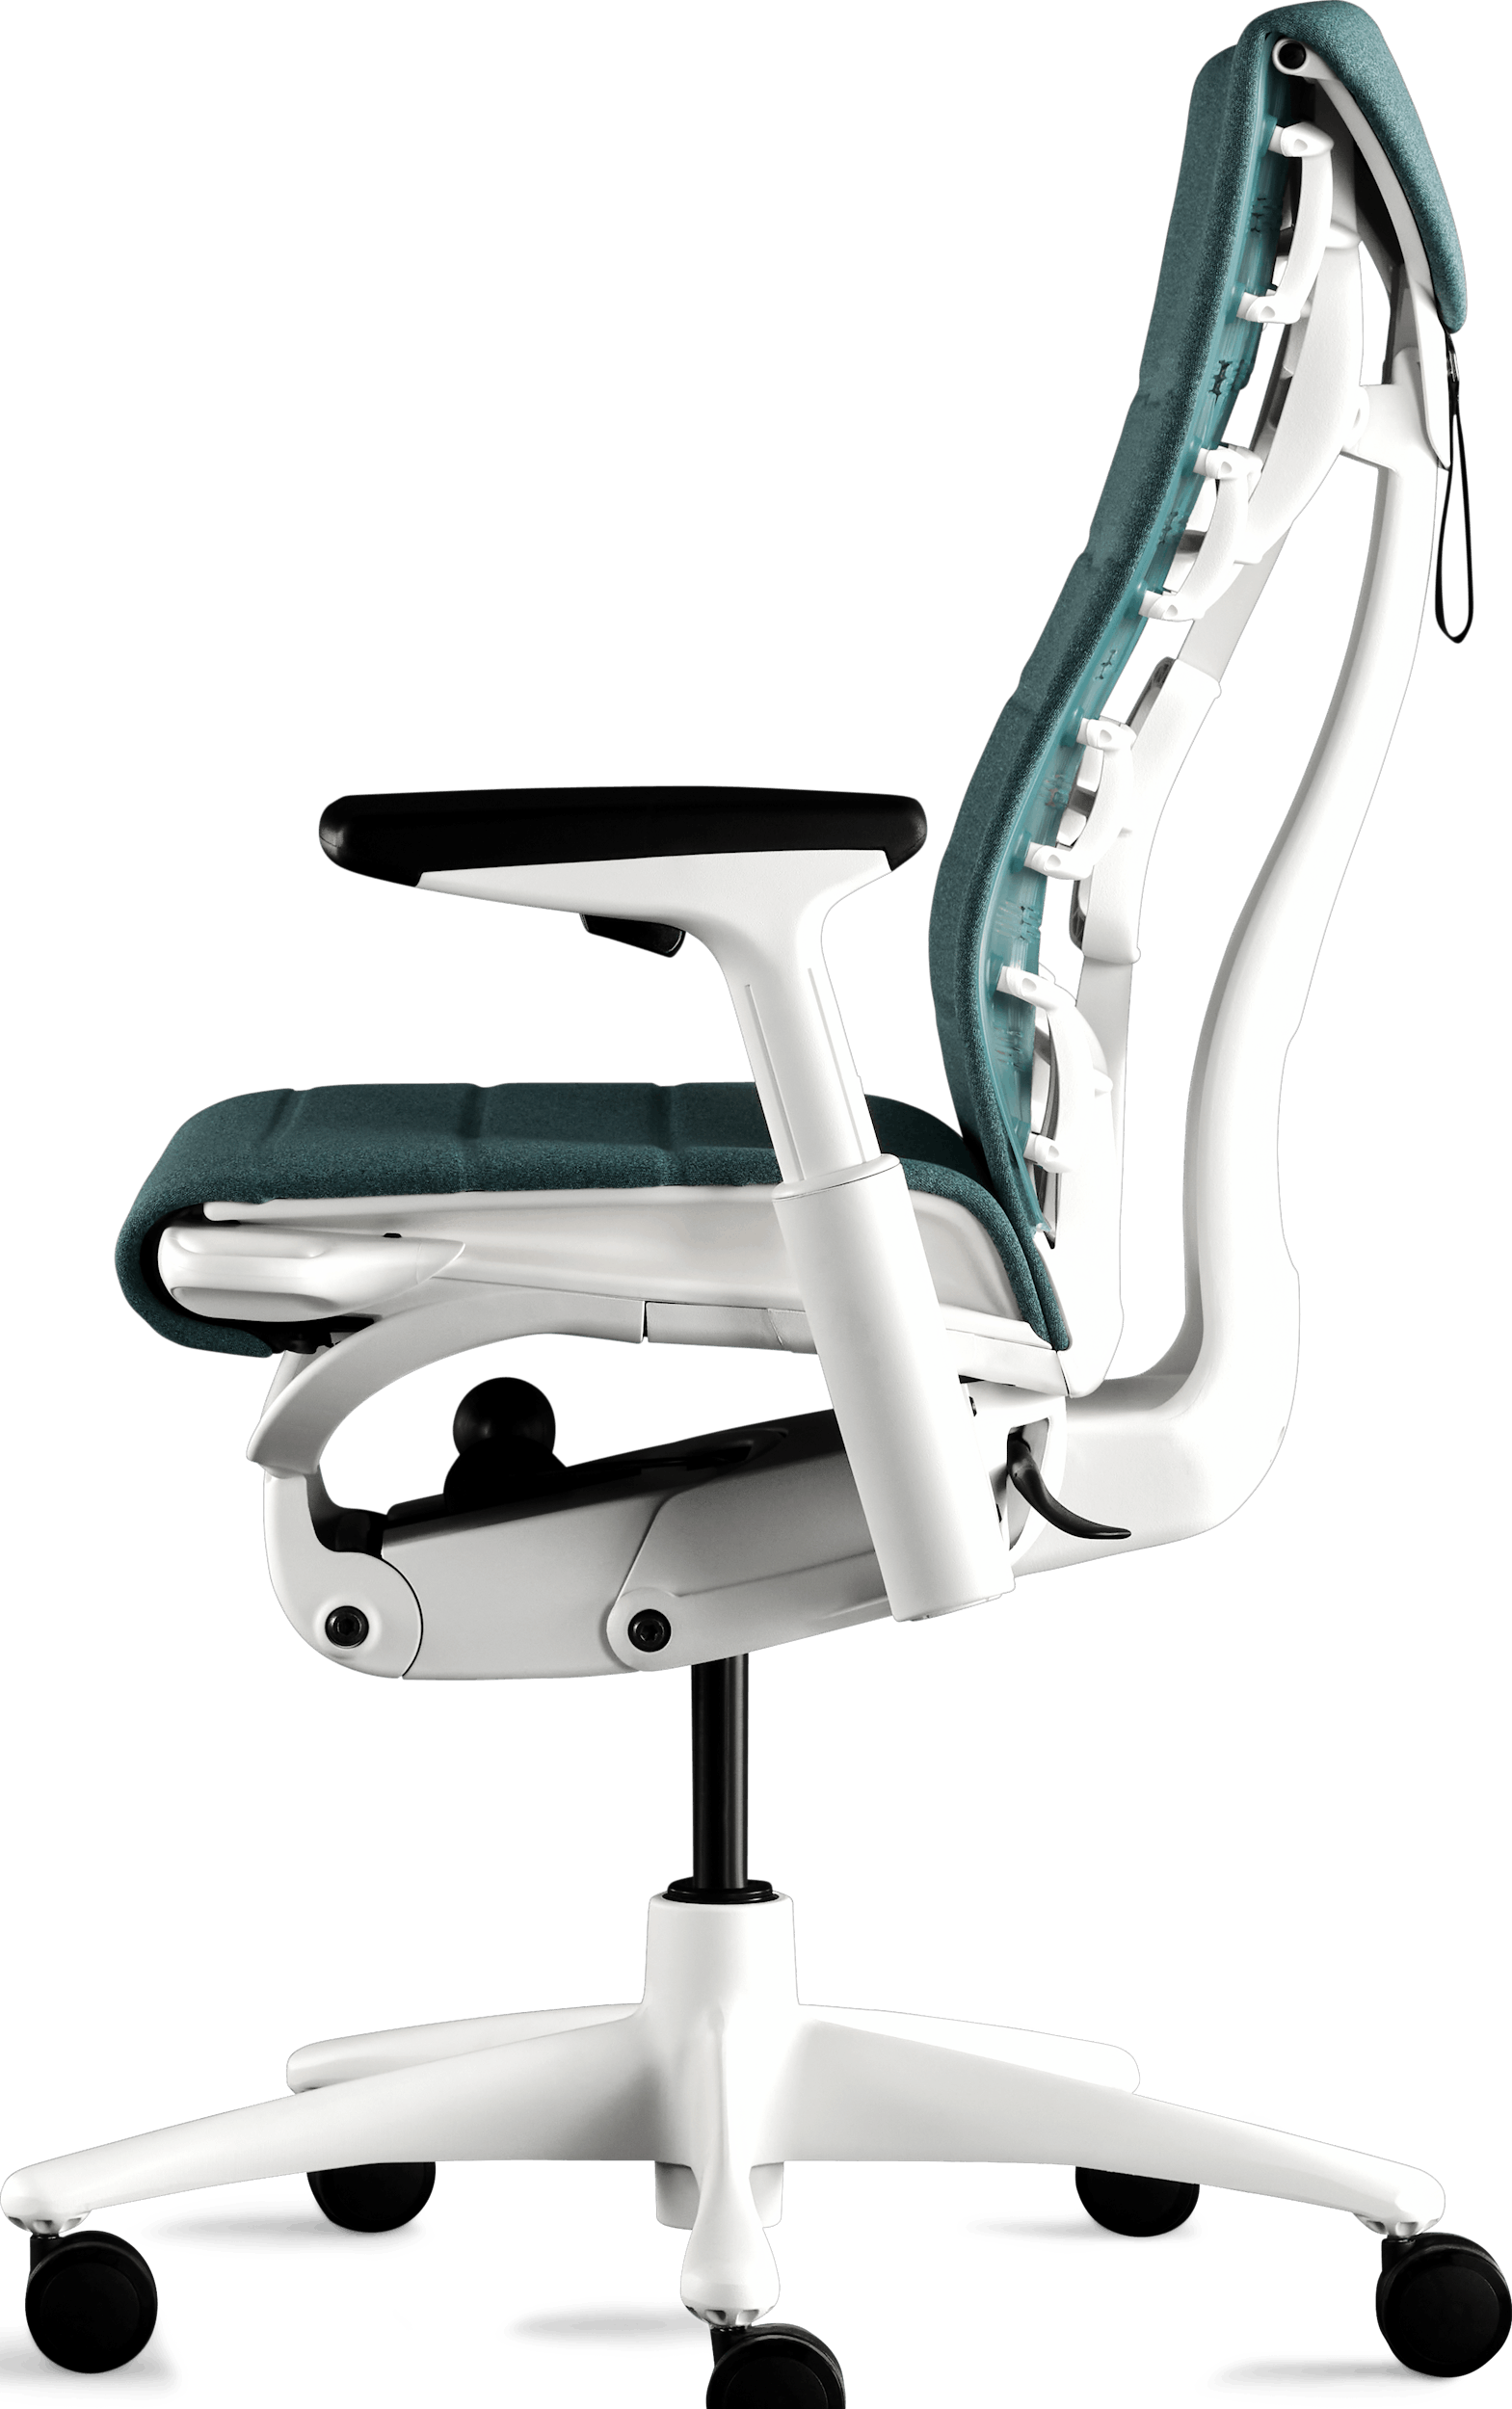 Best Chair For Handicapped Person - Foter